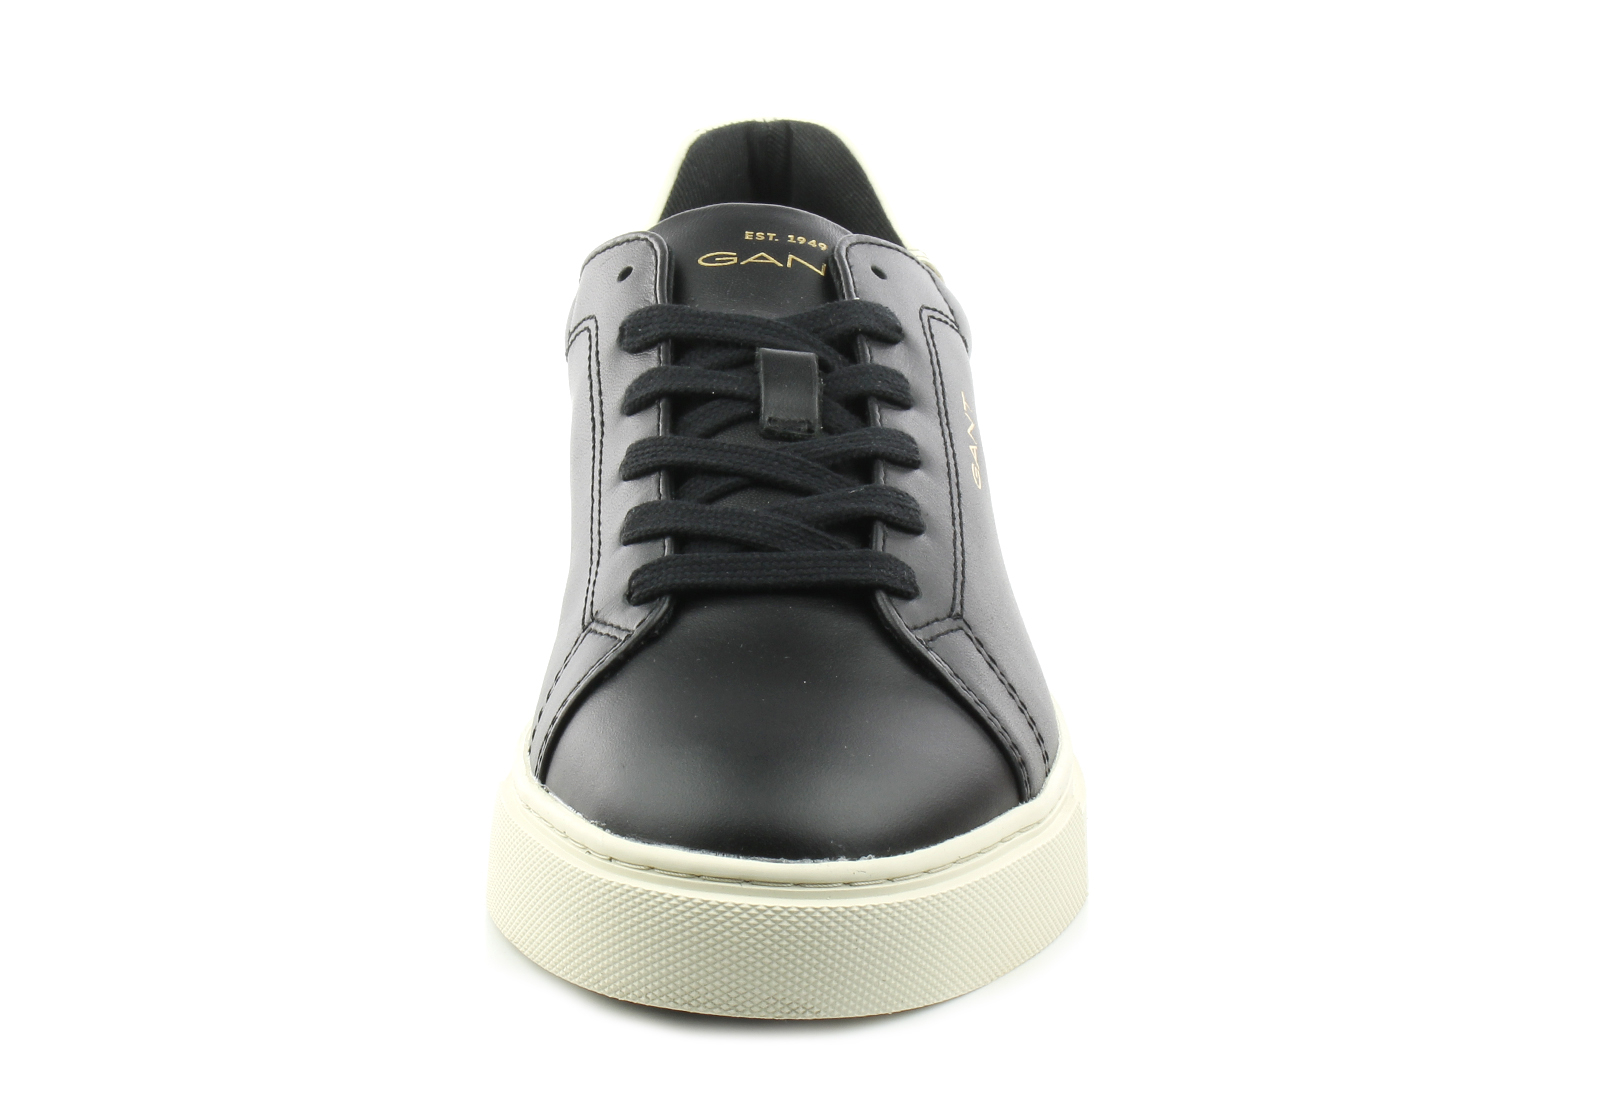 Gant Trainers - Julice - 27531173-G00 - Online shop for sneakers, shoes ...